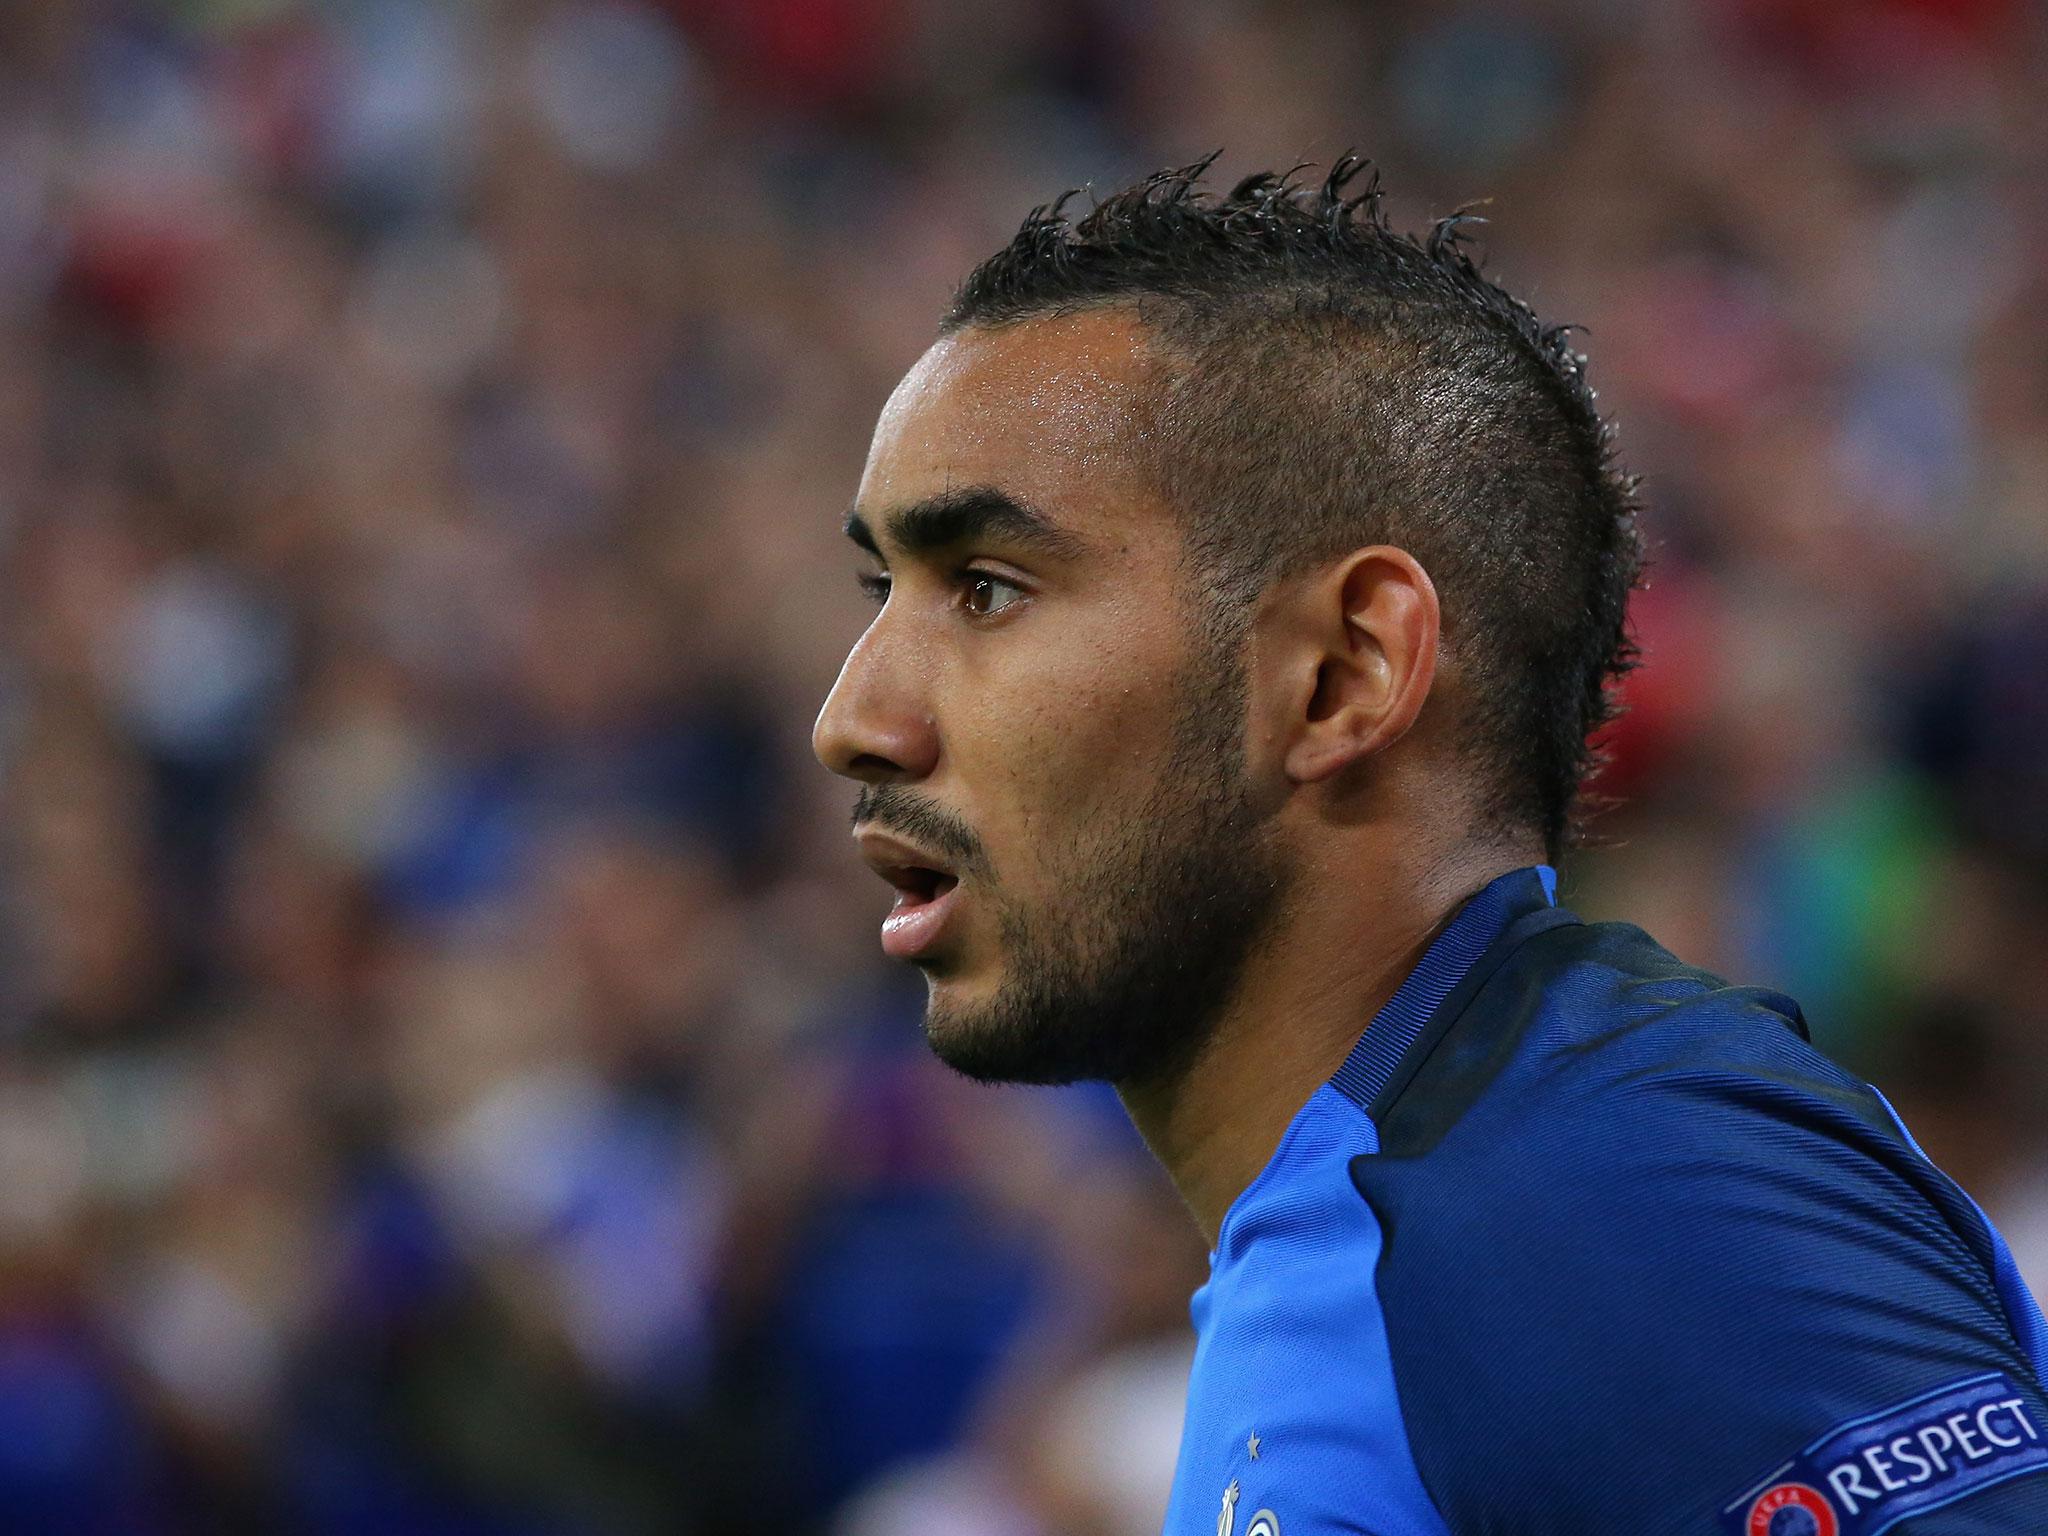 Man-of-the-moment Dimitri Payet has emerged as France's star man